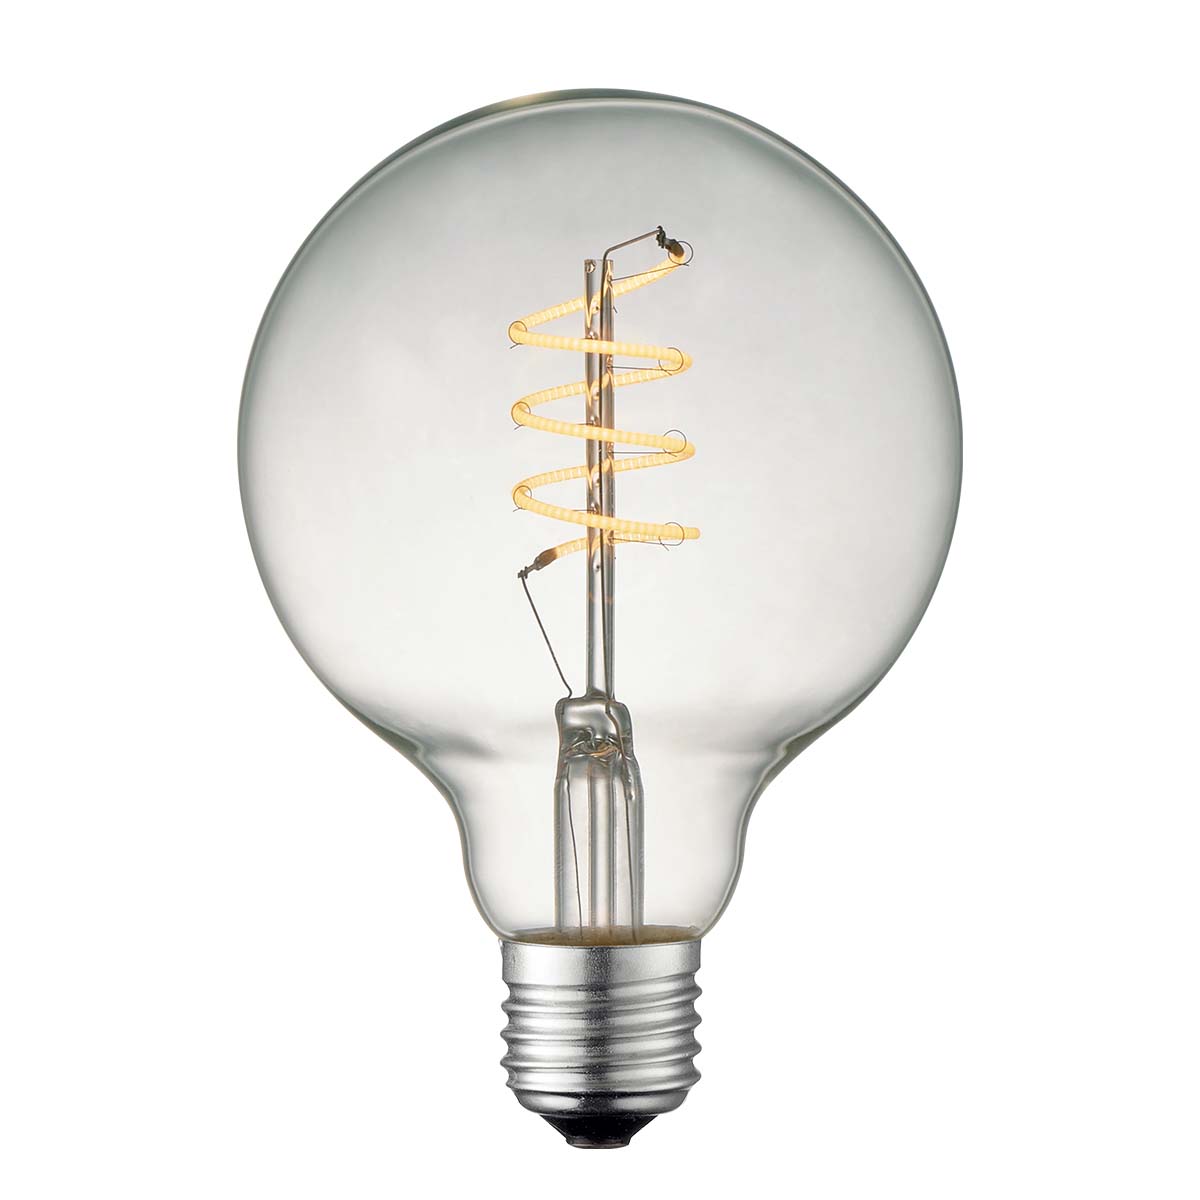 Tangla lighting - TLB-8008-04CL - LED Light Bulb Double Spiral filament - G95 4W clear - dimmable - E27